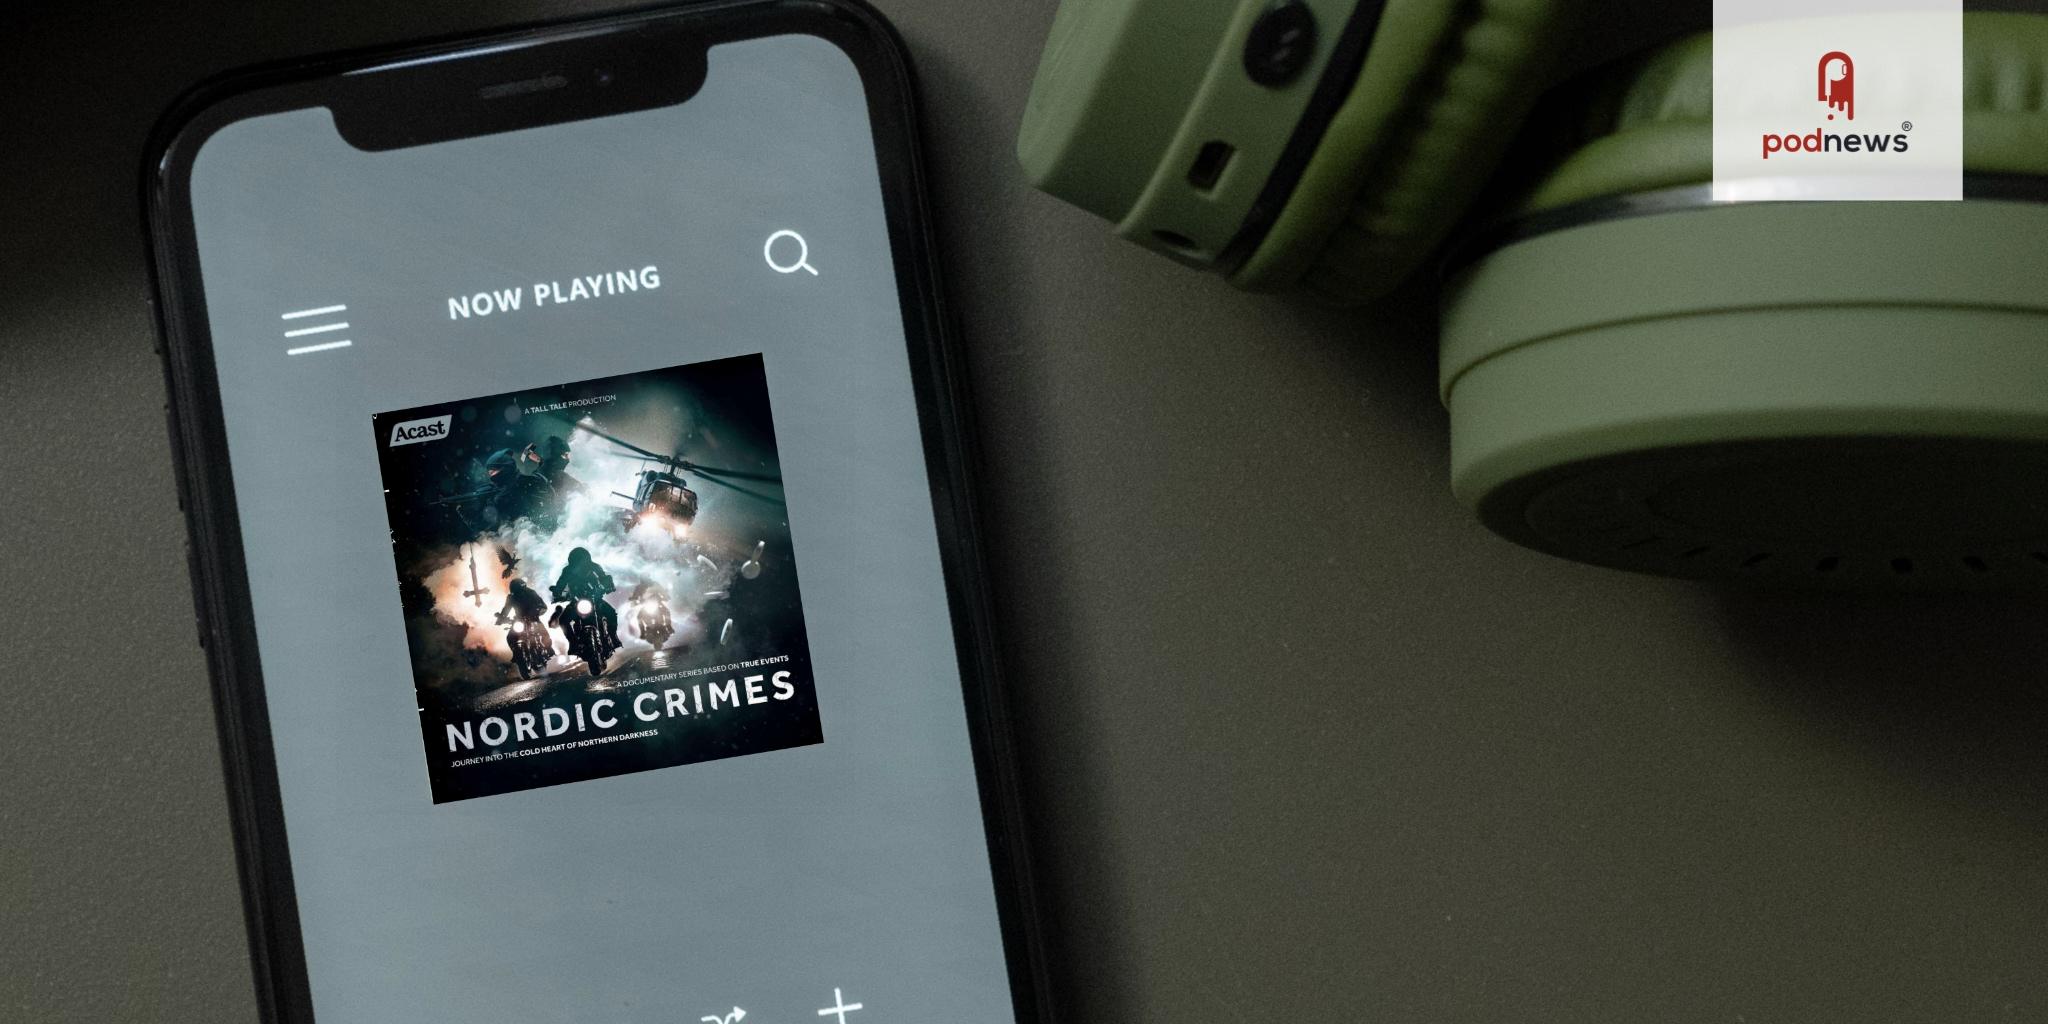 Acast launches the new podcast series Nordic Crimes - Nordic crime in a global format